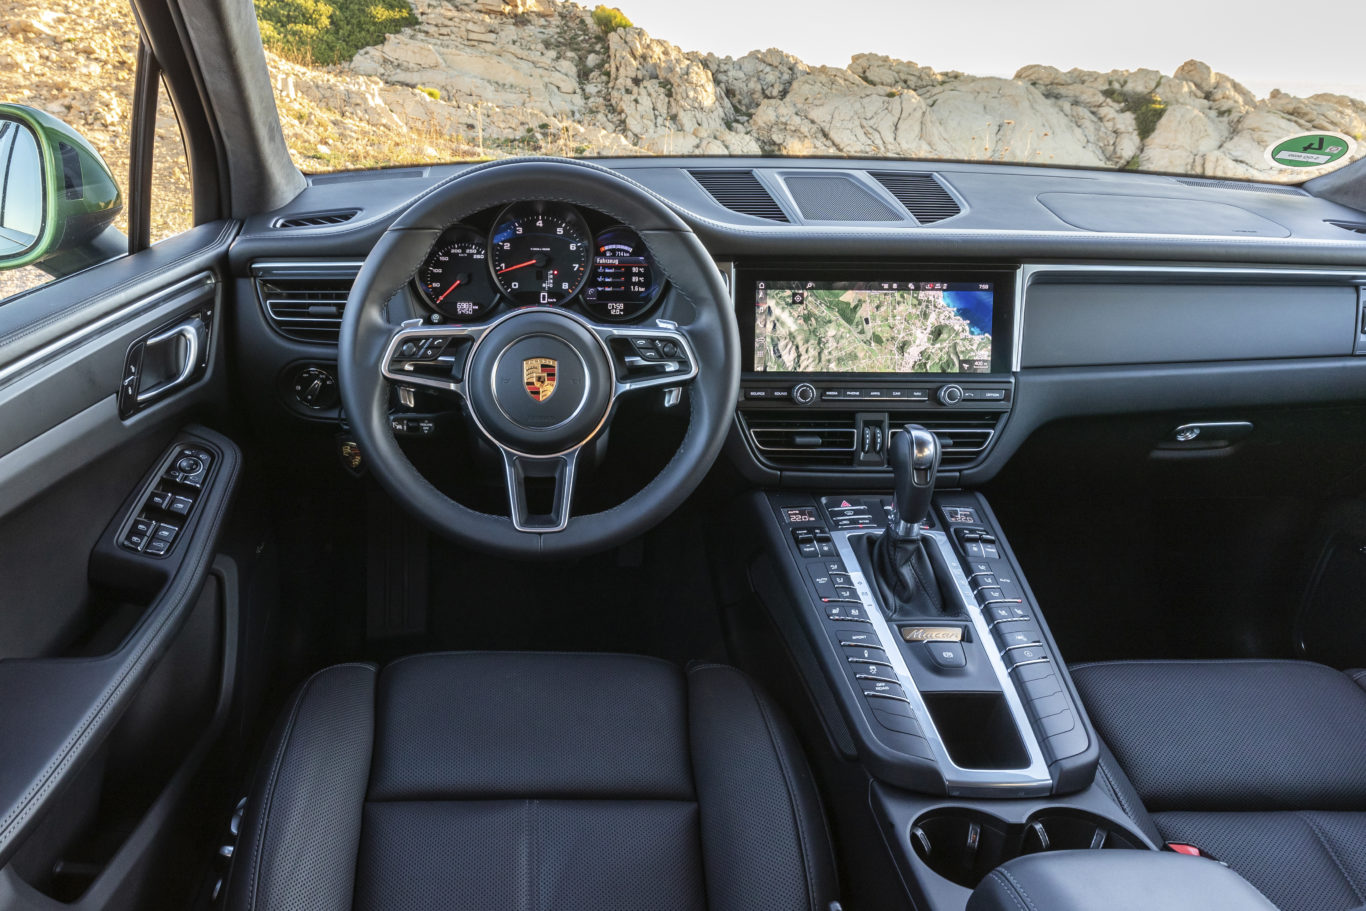 The interior of the Macan has been given a serious upgrade